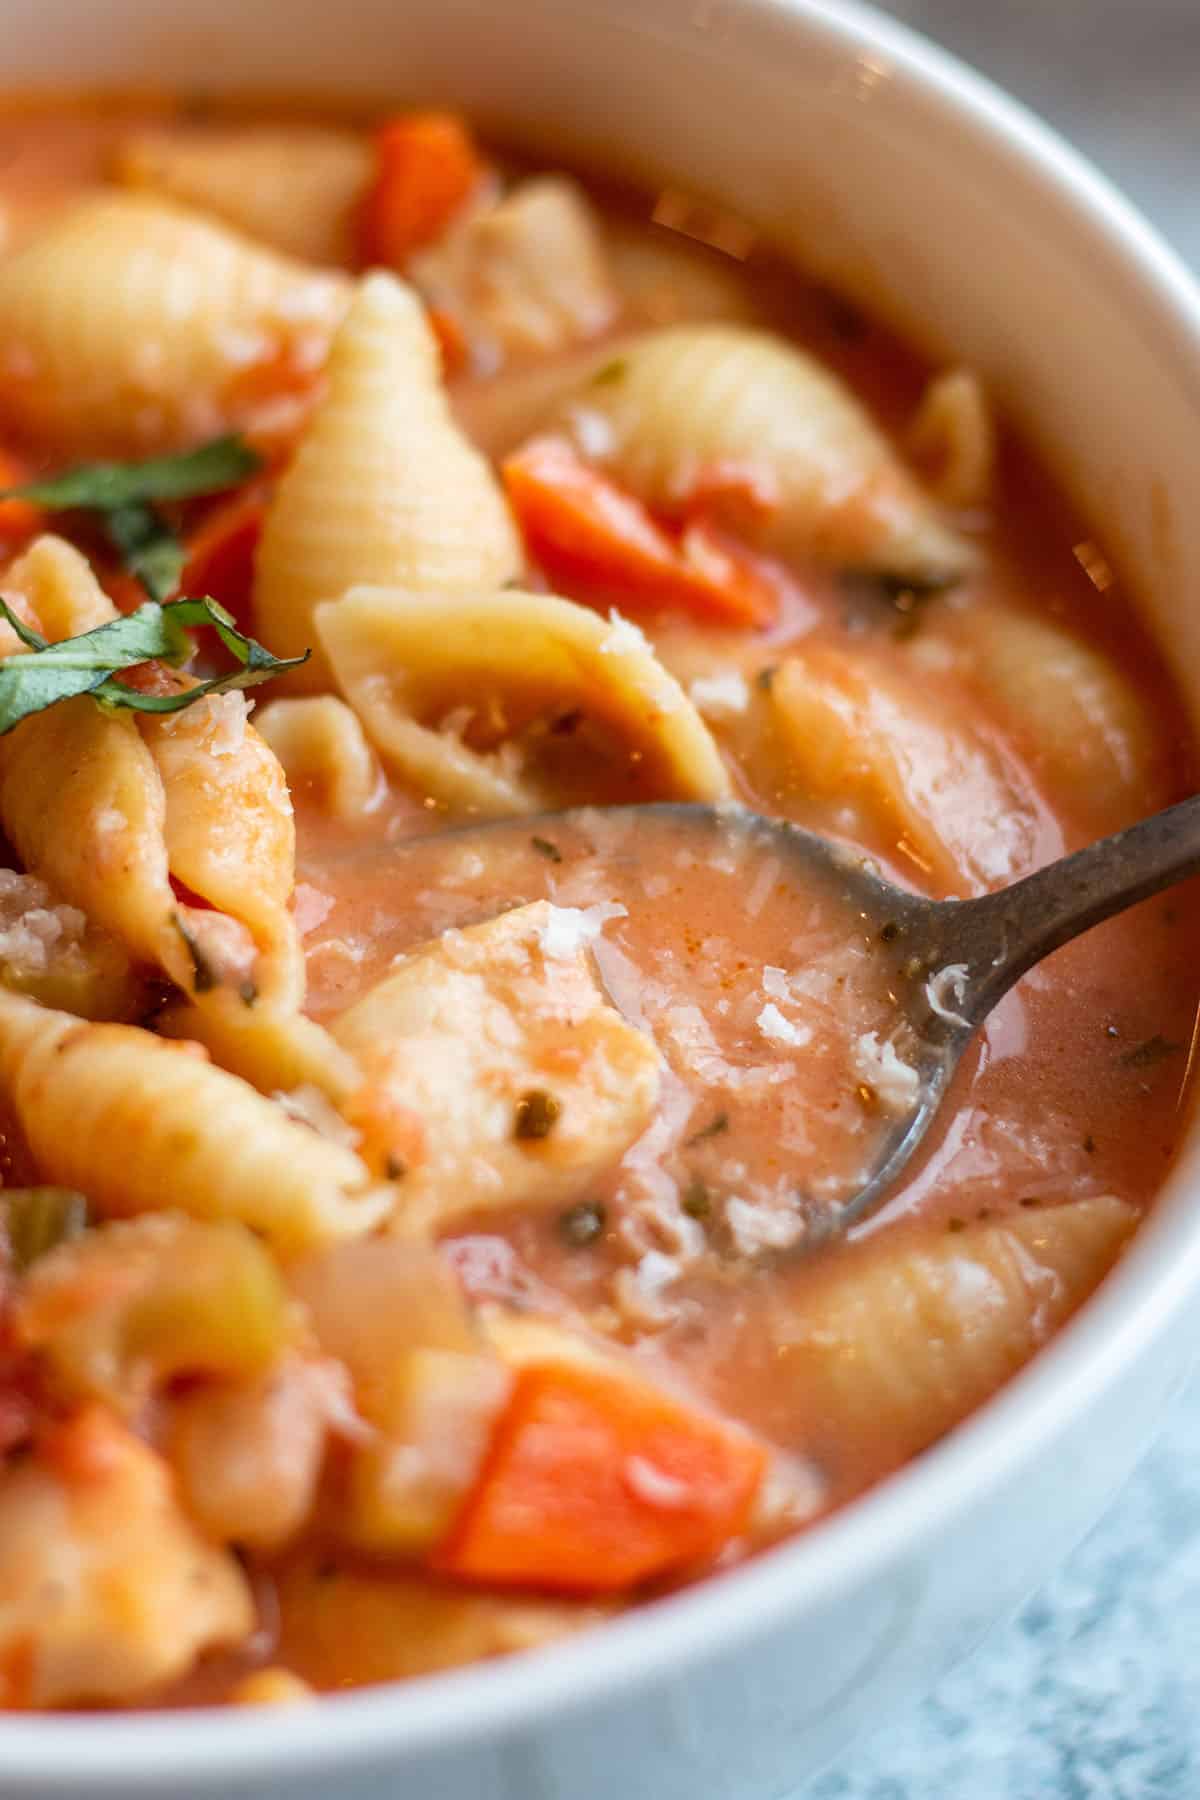 Spoon with creamy tomato soup with noodles, carrots, and basil. 